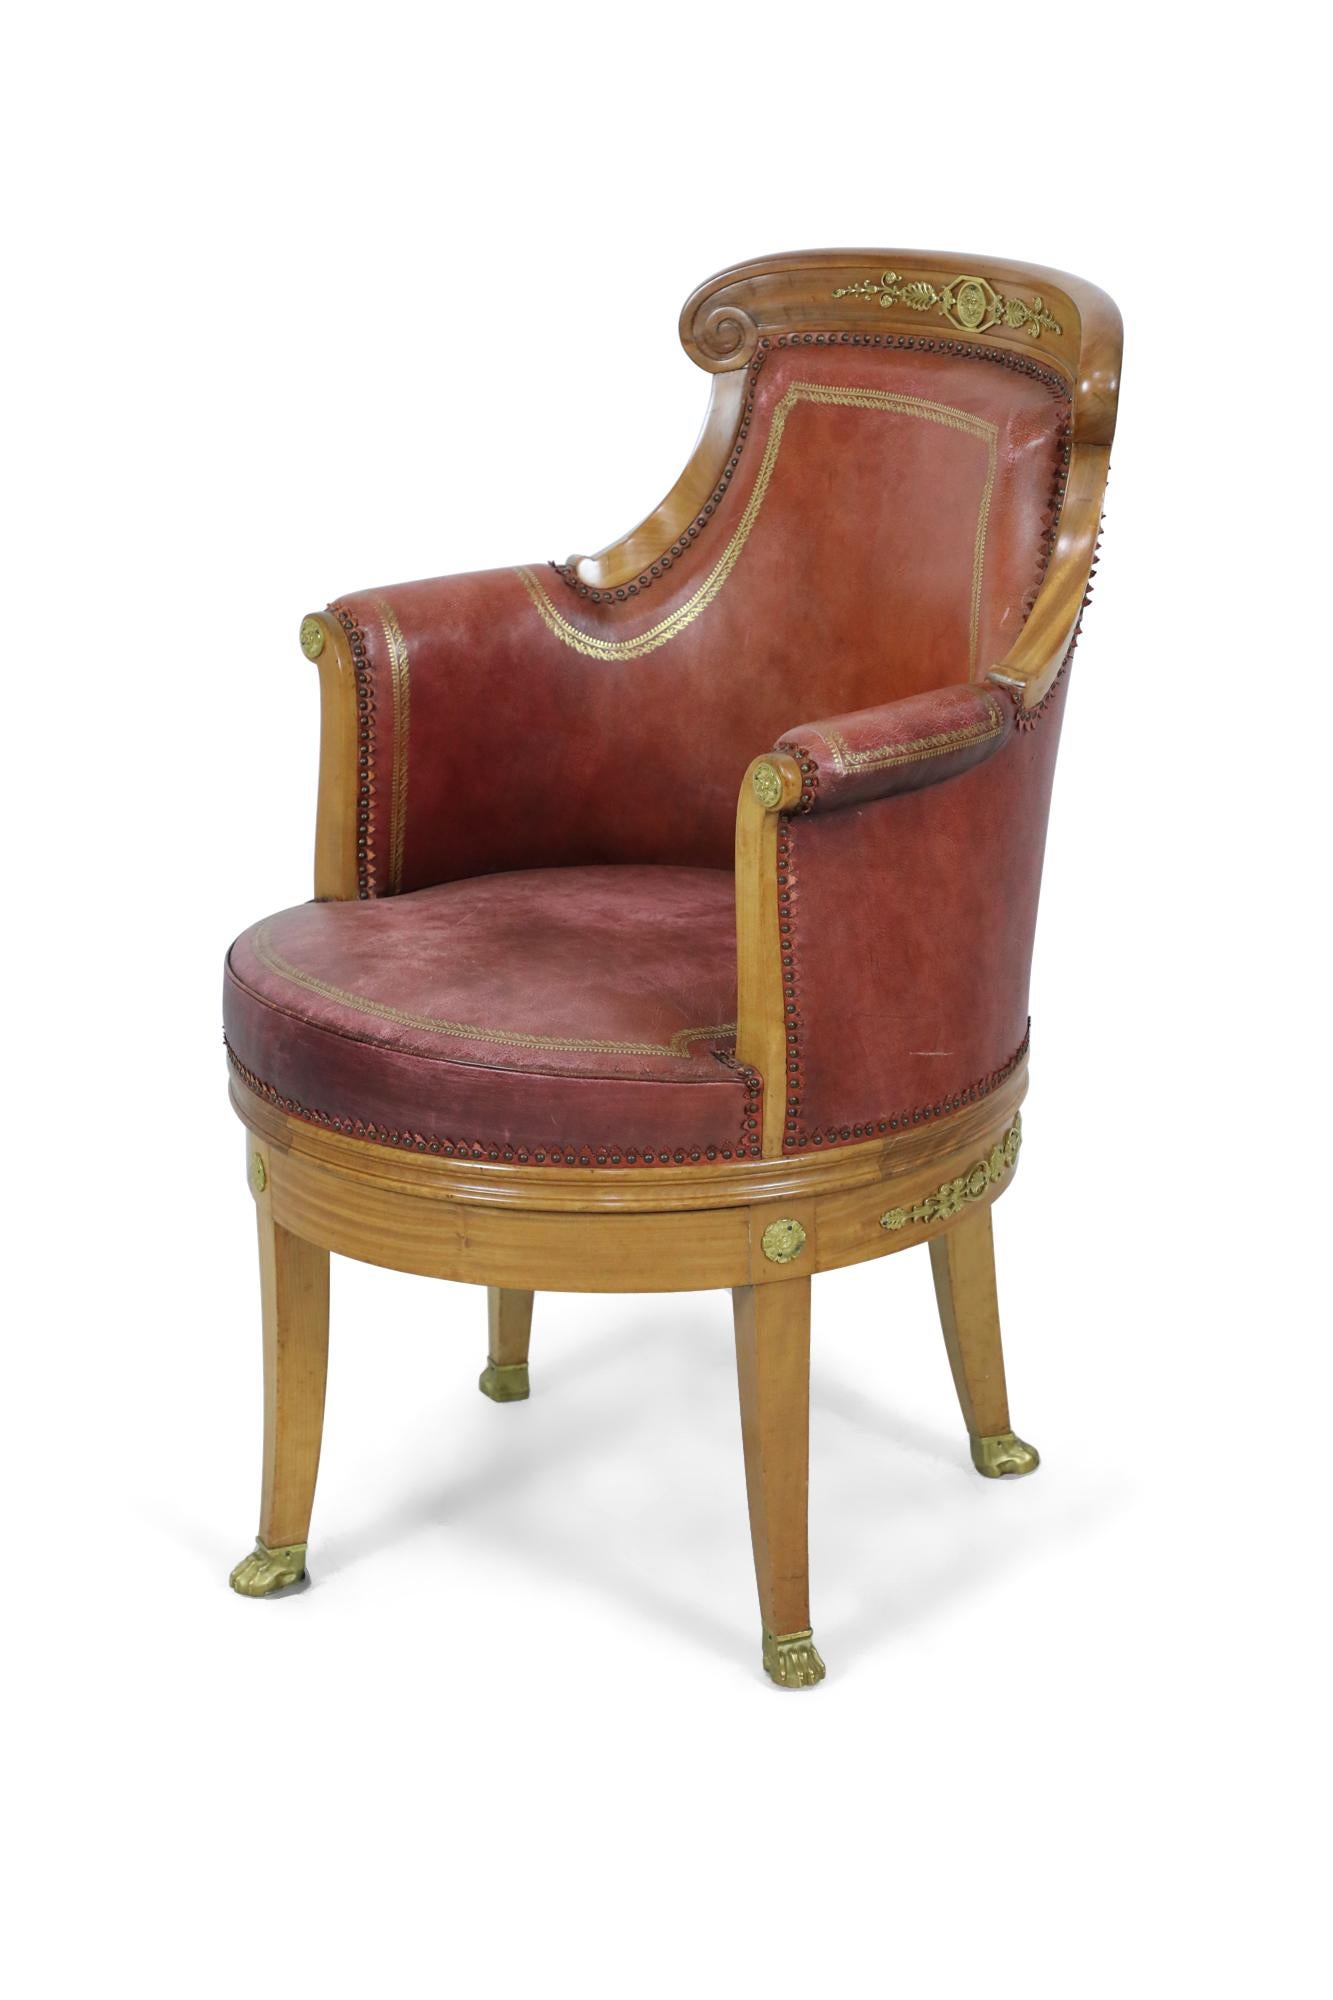 French Empire blond mahogany swivel armchair upholstered in gilt embossed red leather with brass nail head trim and having bronze embellishments and medallions throughout with hoof sabots.